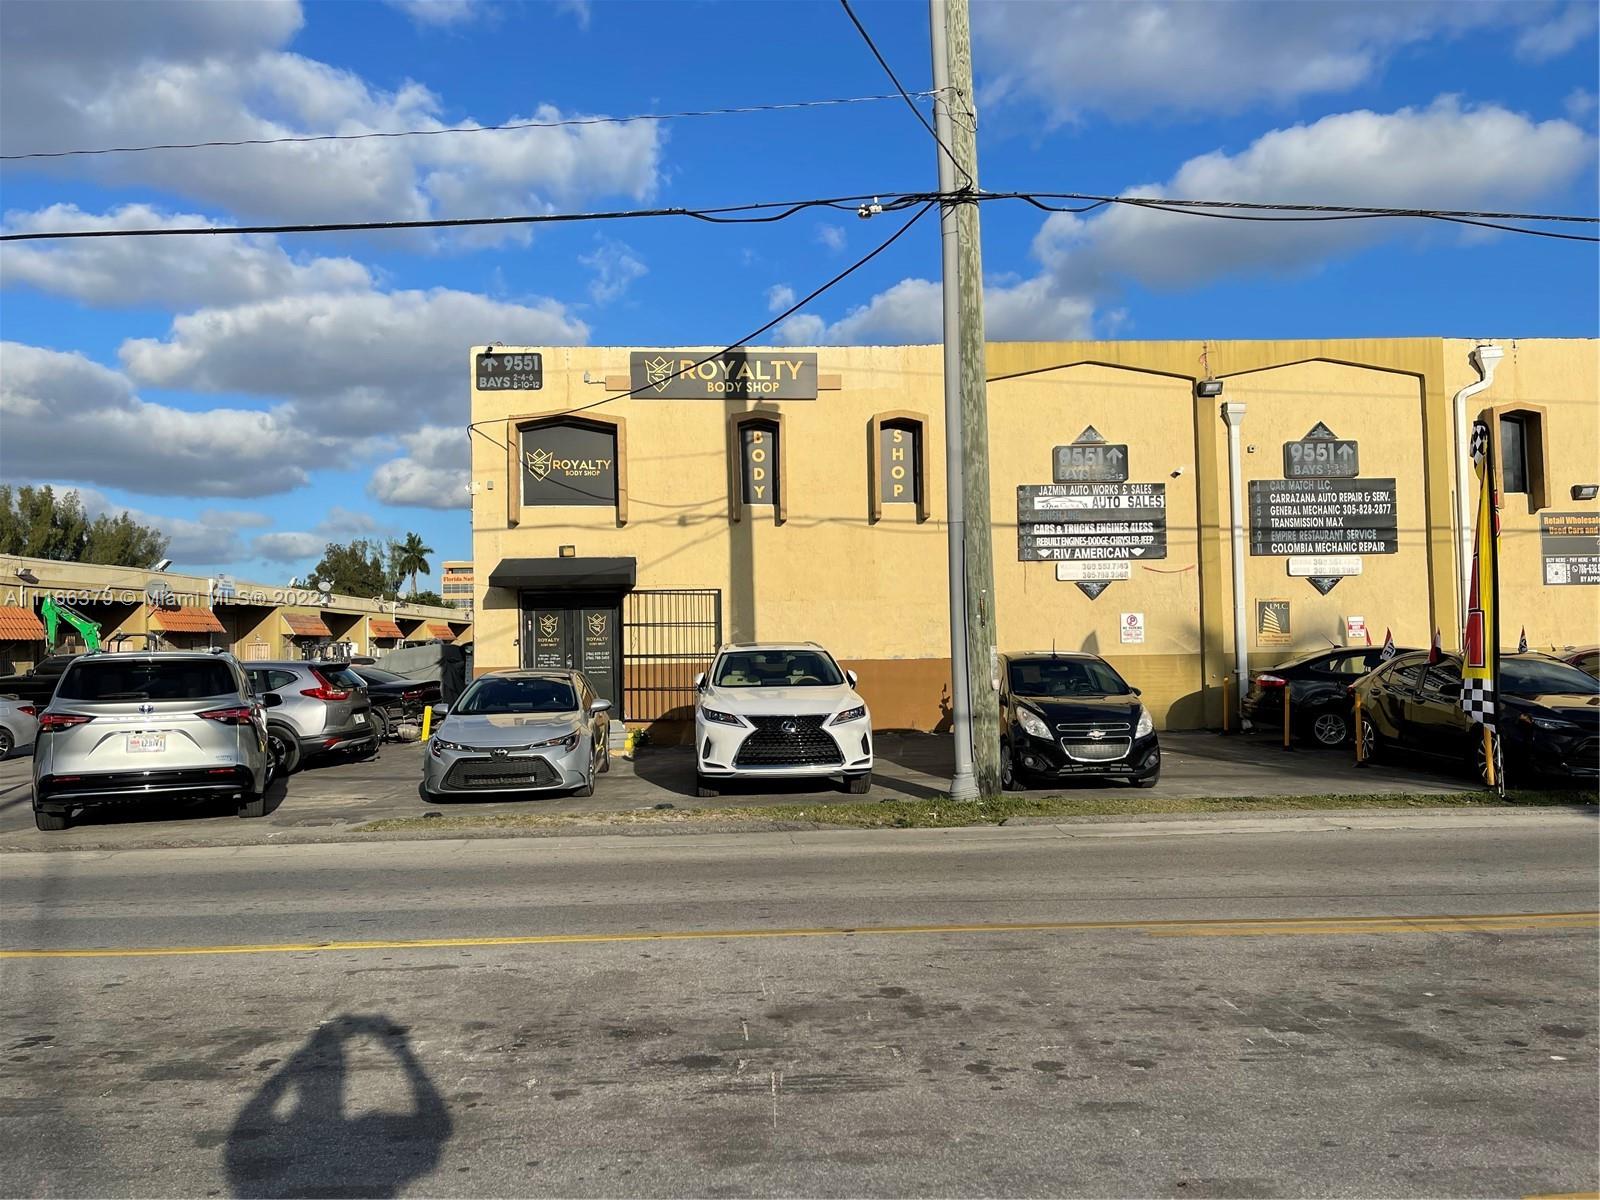 Royalty Body Shop the Art Collision Repair & Paint Center for sale in Hialeah-PRIME location-close to Okechobee and Palmetto Xpressway & MIA. an Asset sale with lease. All equipment, multiple lifts, frame machine/computer, compressors, tools, supplies,& Inventory, also offices & storage rooms, reception/waiting area, and bathrooms. The business includes a 2nd collision repair-only shop, Business services all makes & models, has all licenses/permits up-to-date-Great opportunity for Business sales of insurance claims, Please do not engage employees -we do not want to hurt the business. Call us anytime, WE ANSWER!